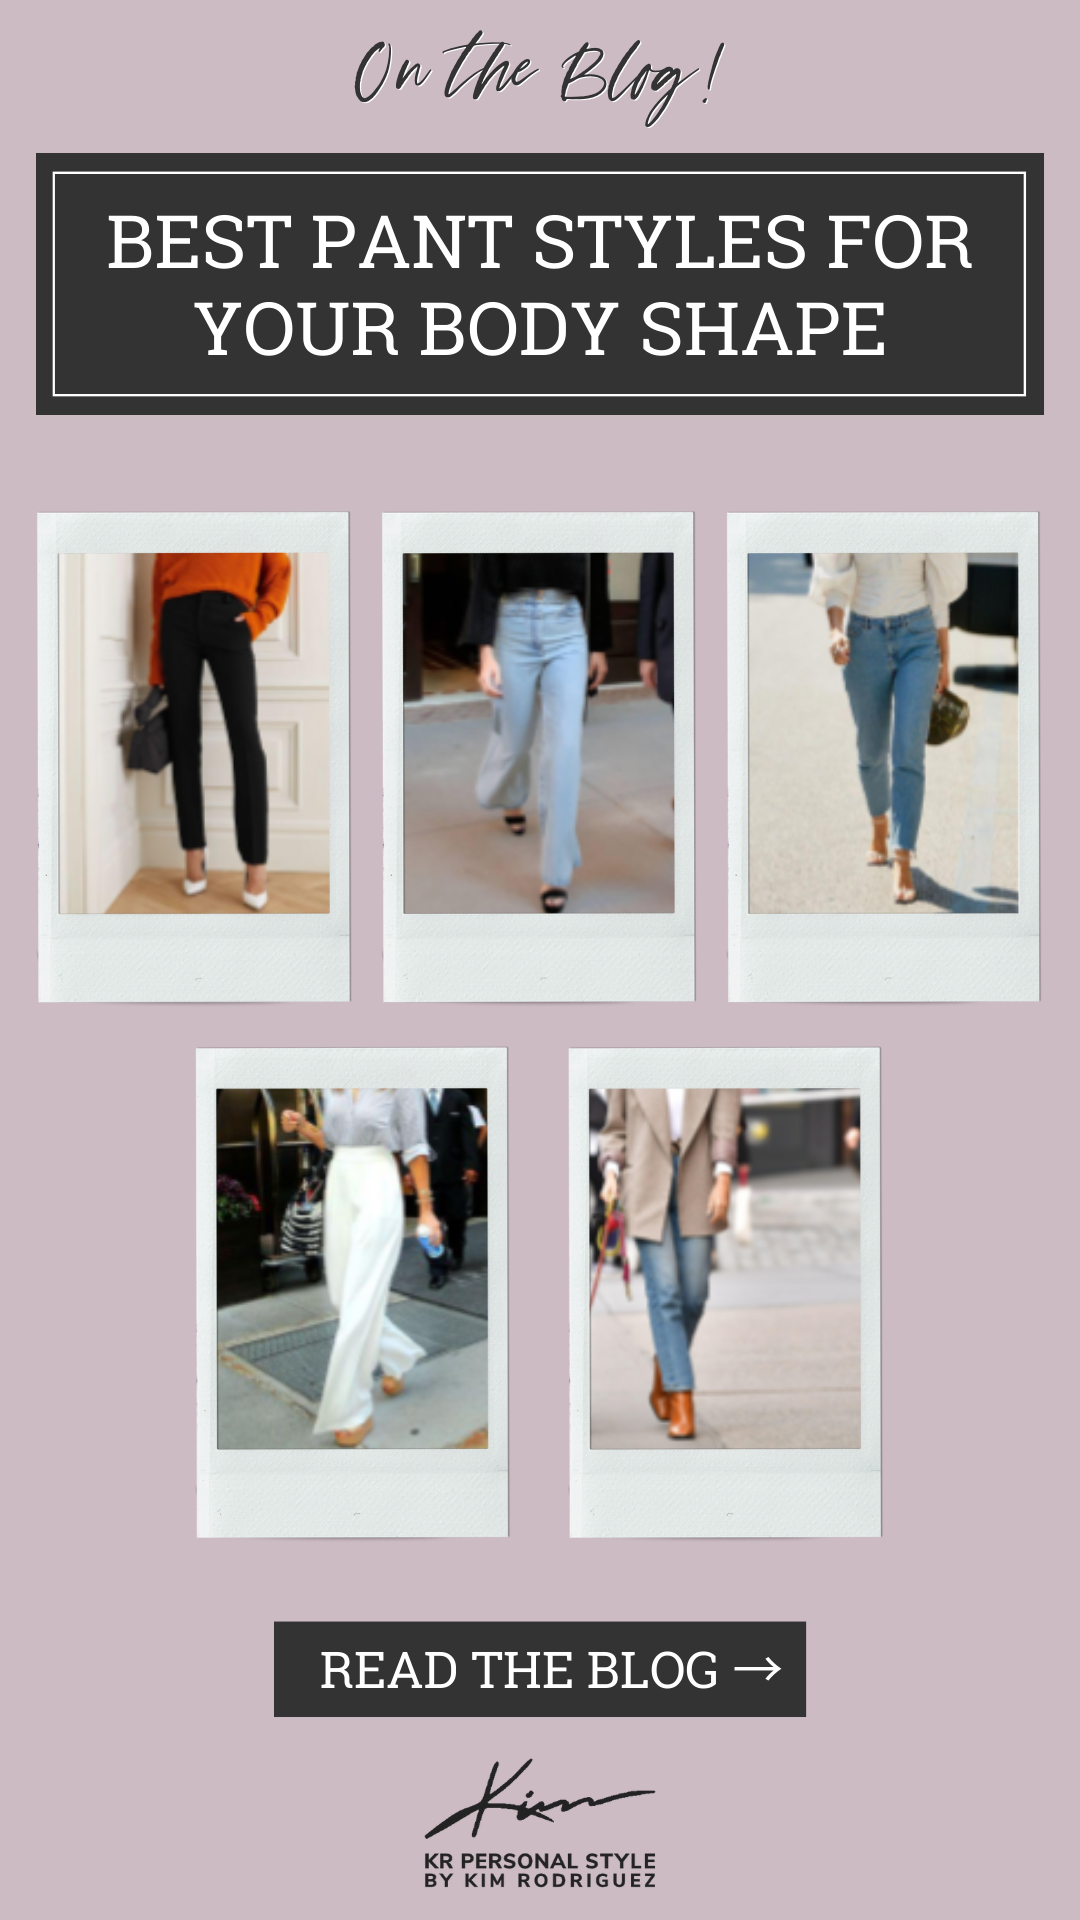 The Best Pants for Your Body Type